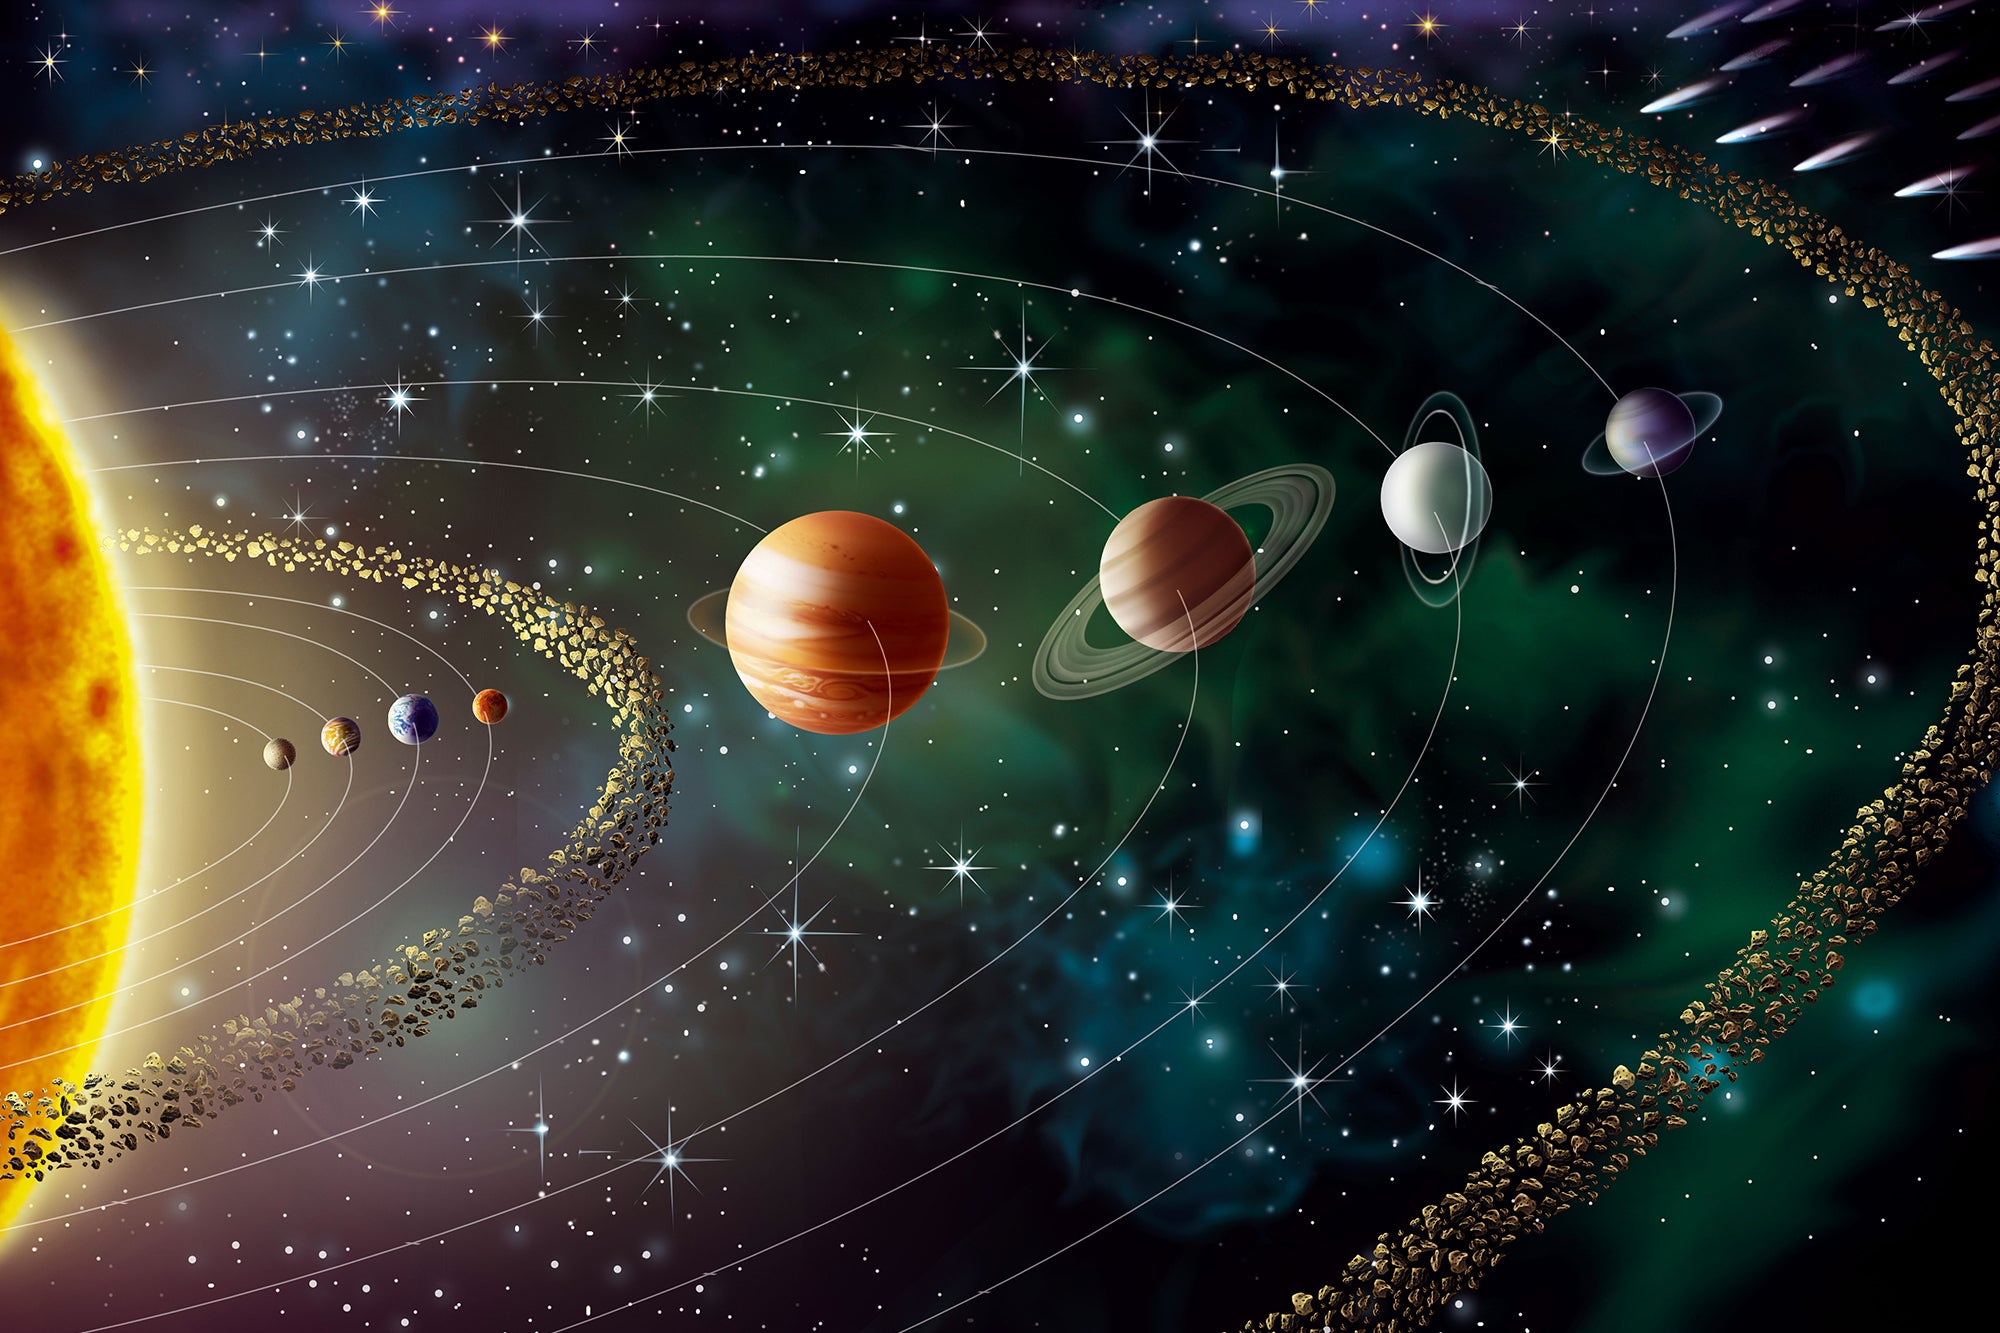 Illustration of the solar system, including its eight planets and the sun: Mercury, Venus, the Earth, Mars, asteroid belt, Jupiter, Saturn, Uranus, Neptune and at its outer limits the Kuiper Belt and the Oort Cloud